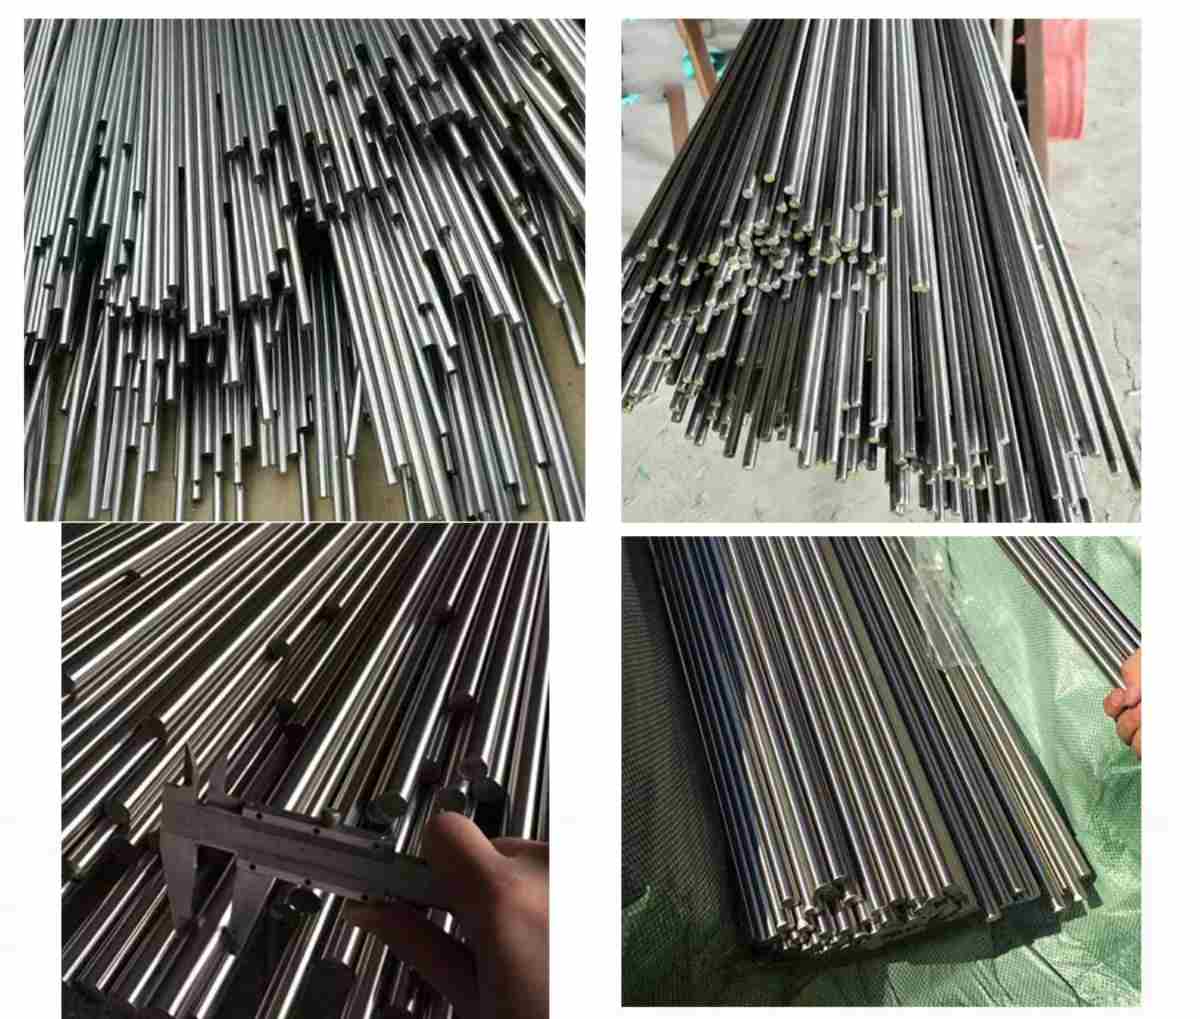 Details of 904L Stainless Steel Bar